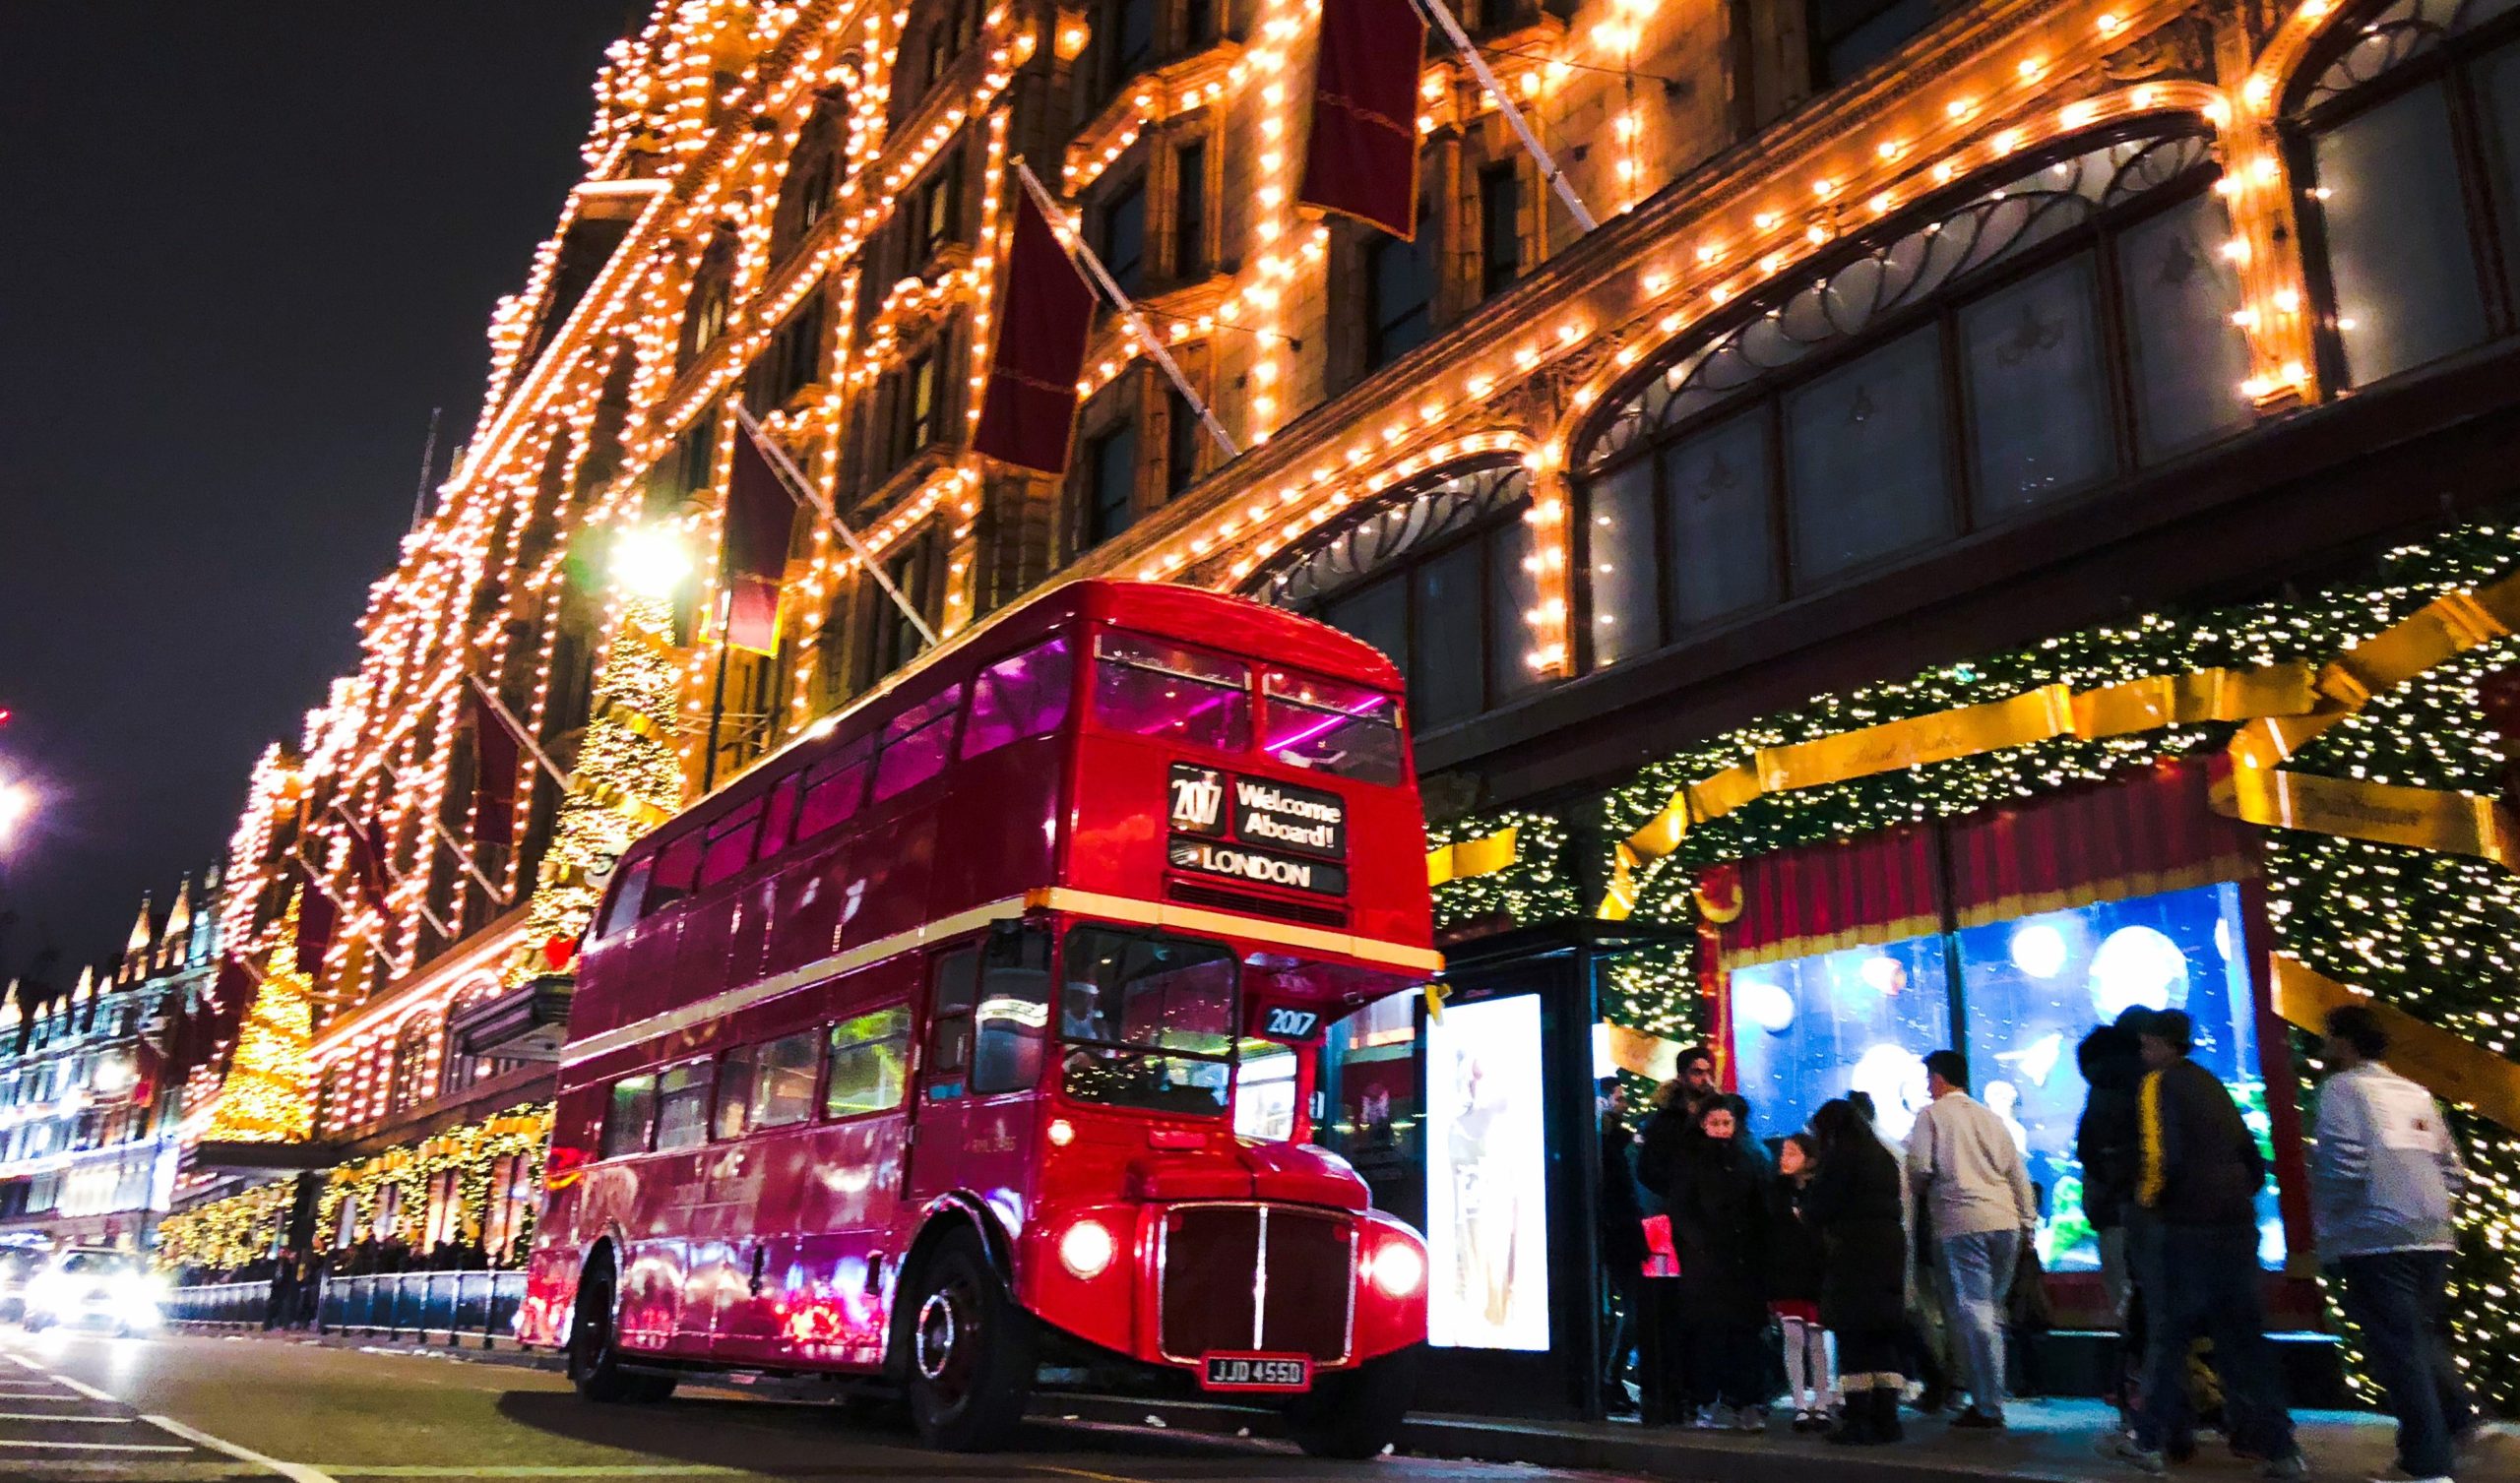 Christmas Tours on the Original Party Bus